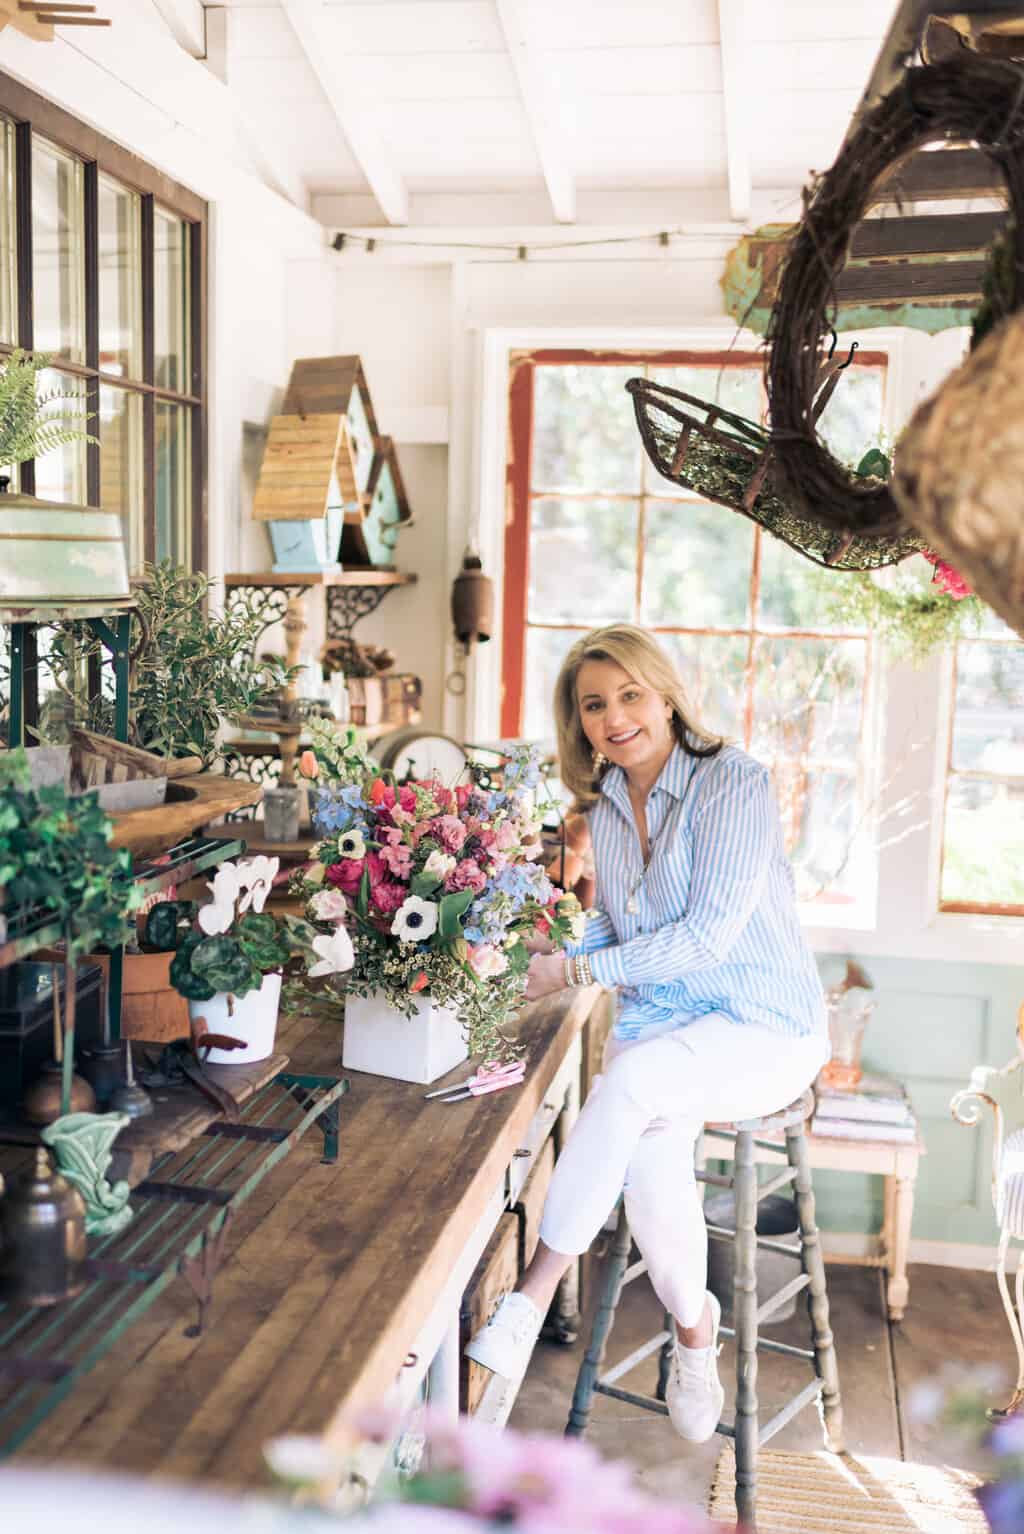 Wendy in the she shed making a floral arrangement